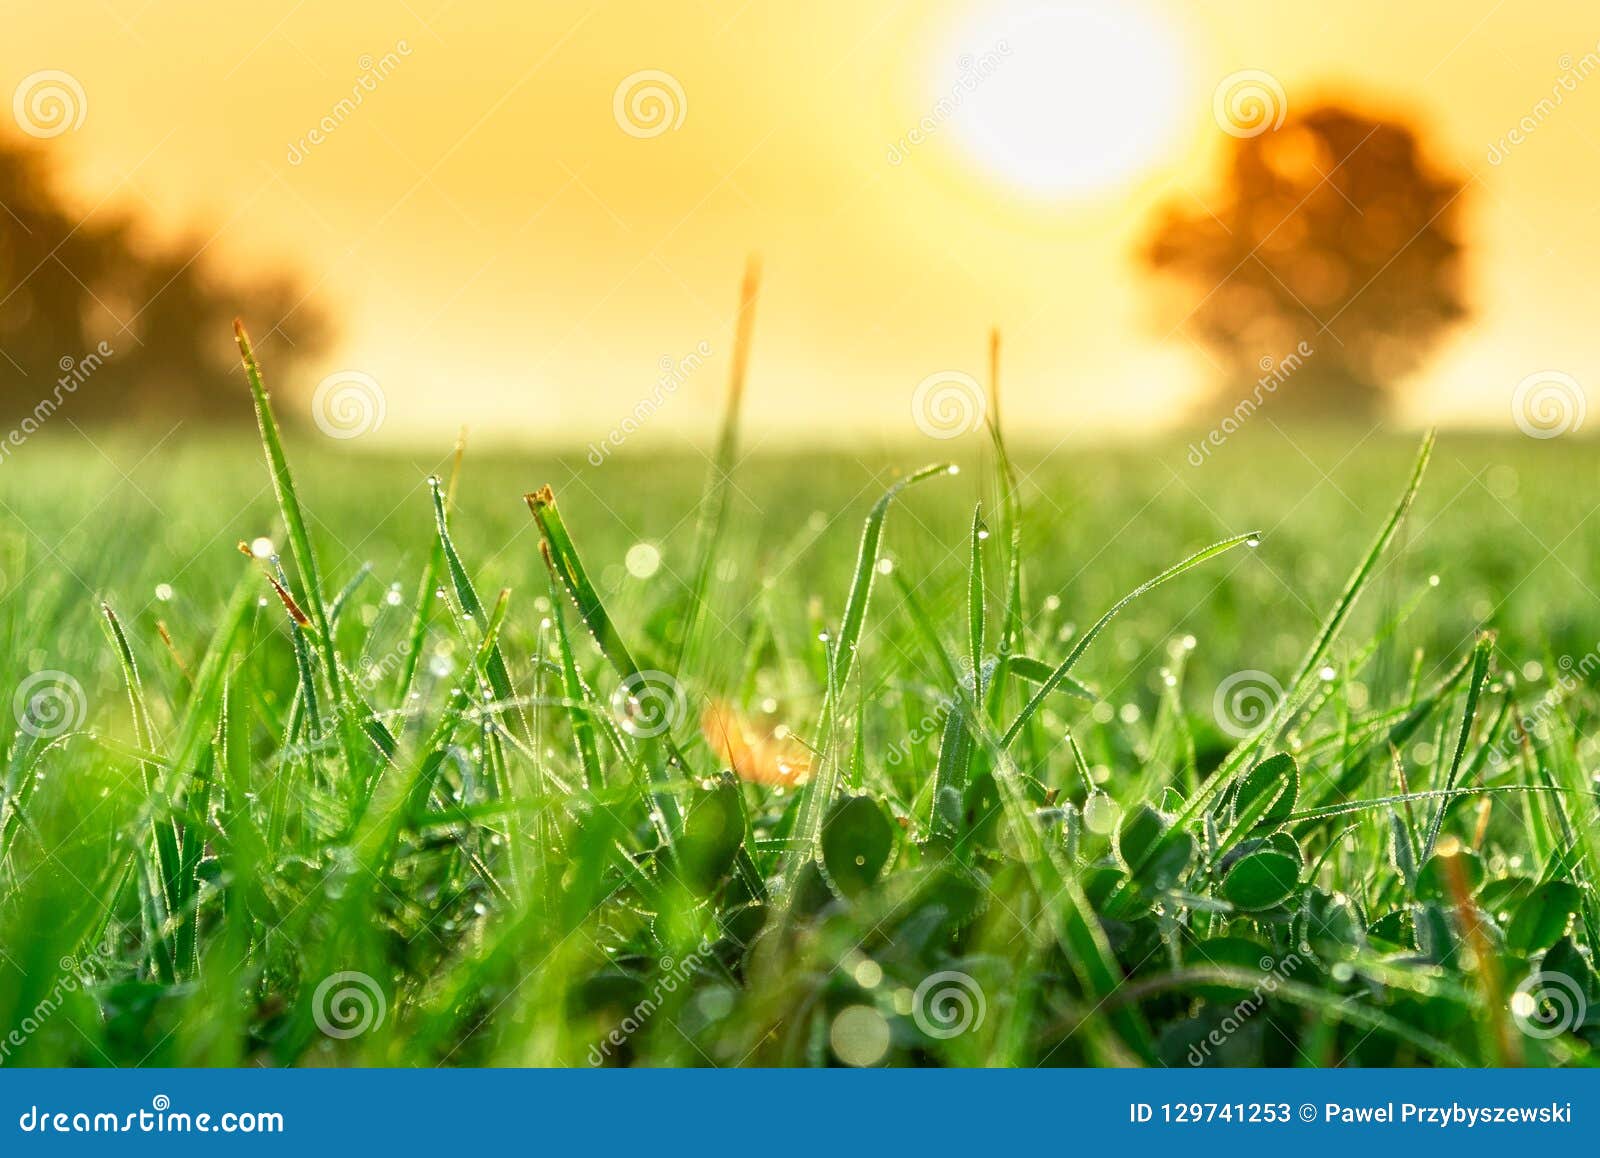 green grass leafs with morning dew drops at sunrise.